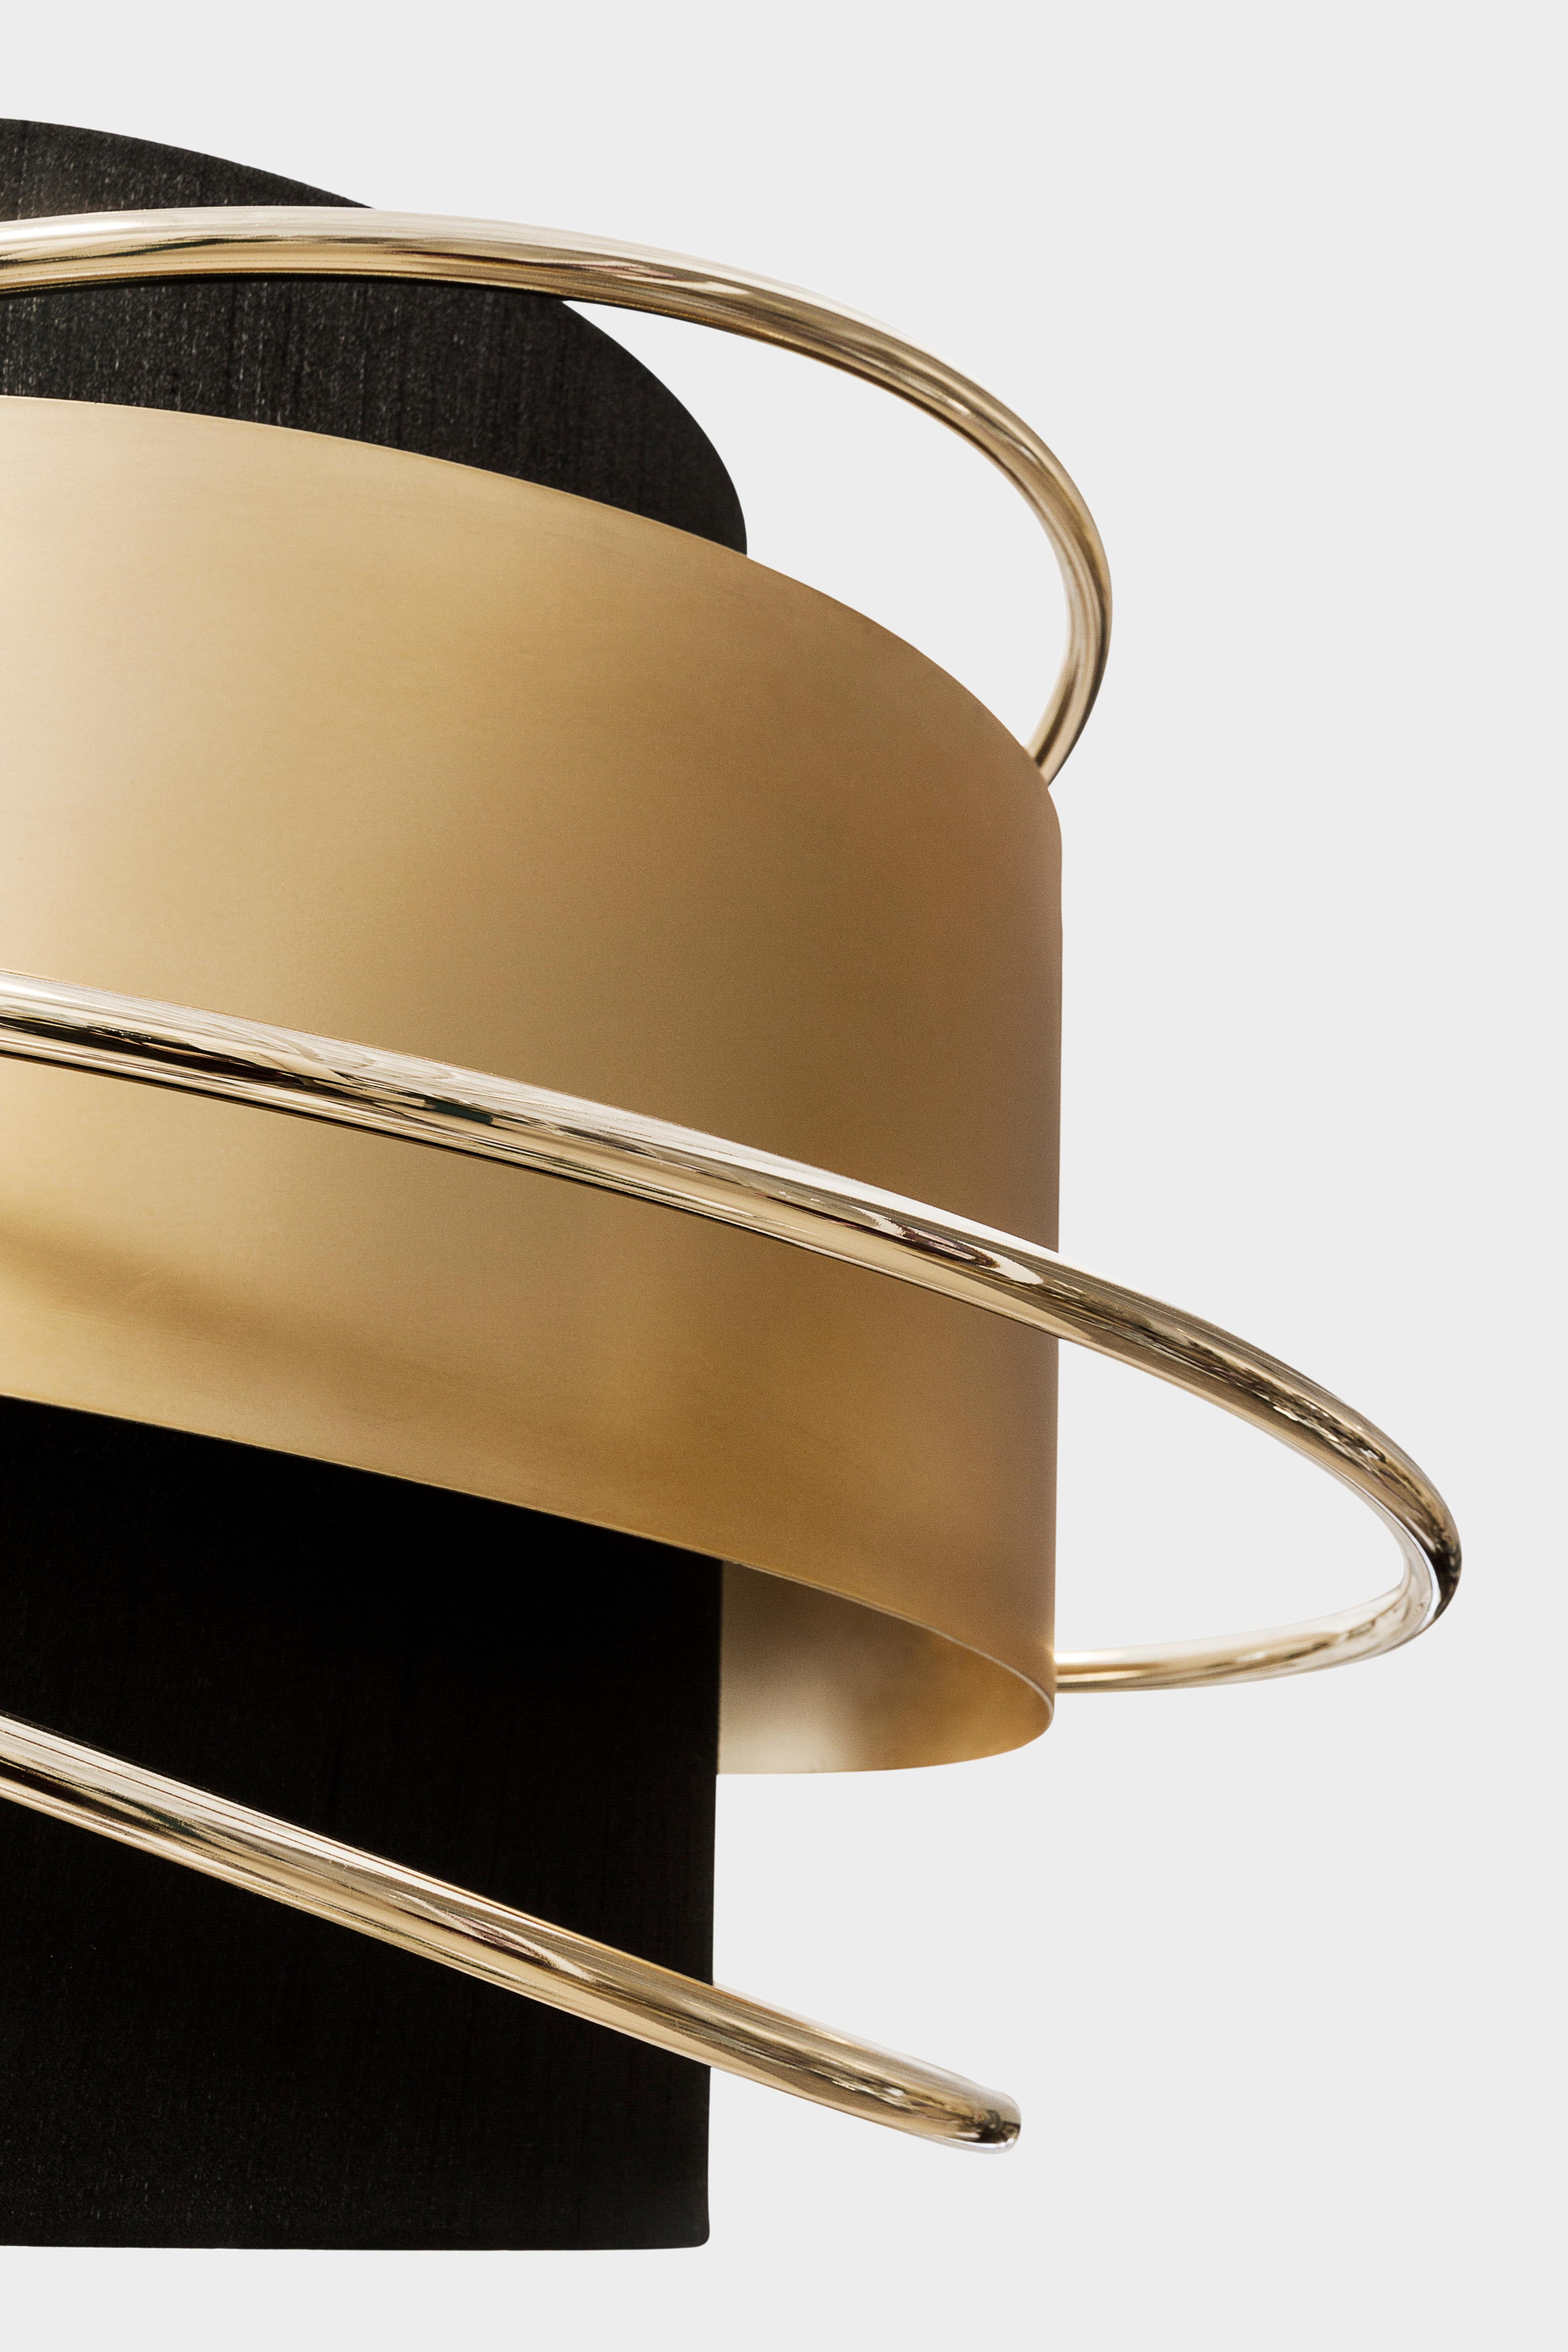 Enlace suspension lamp, Modern Collection, Handcrafted in Portugal - Europe by GF Modern.

To entangle the right moments with the right company, Enlace becomes the center of the scenic location that we call a dining room. Made of polished brass